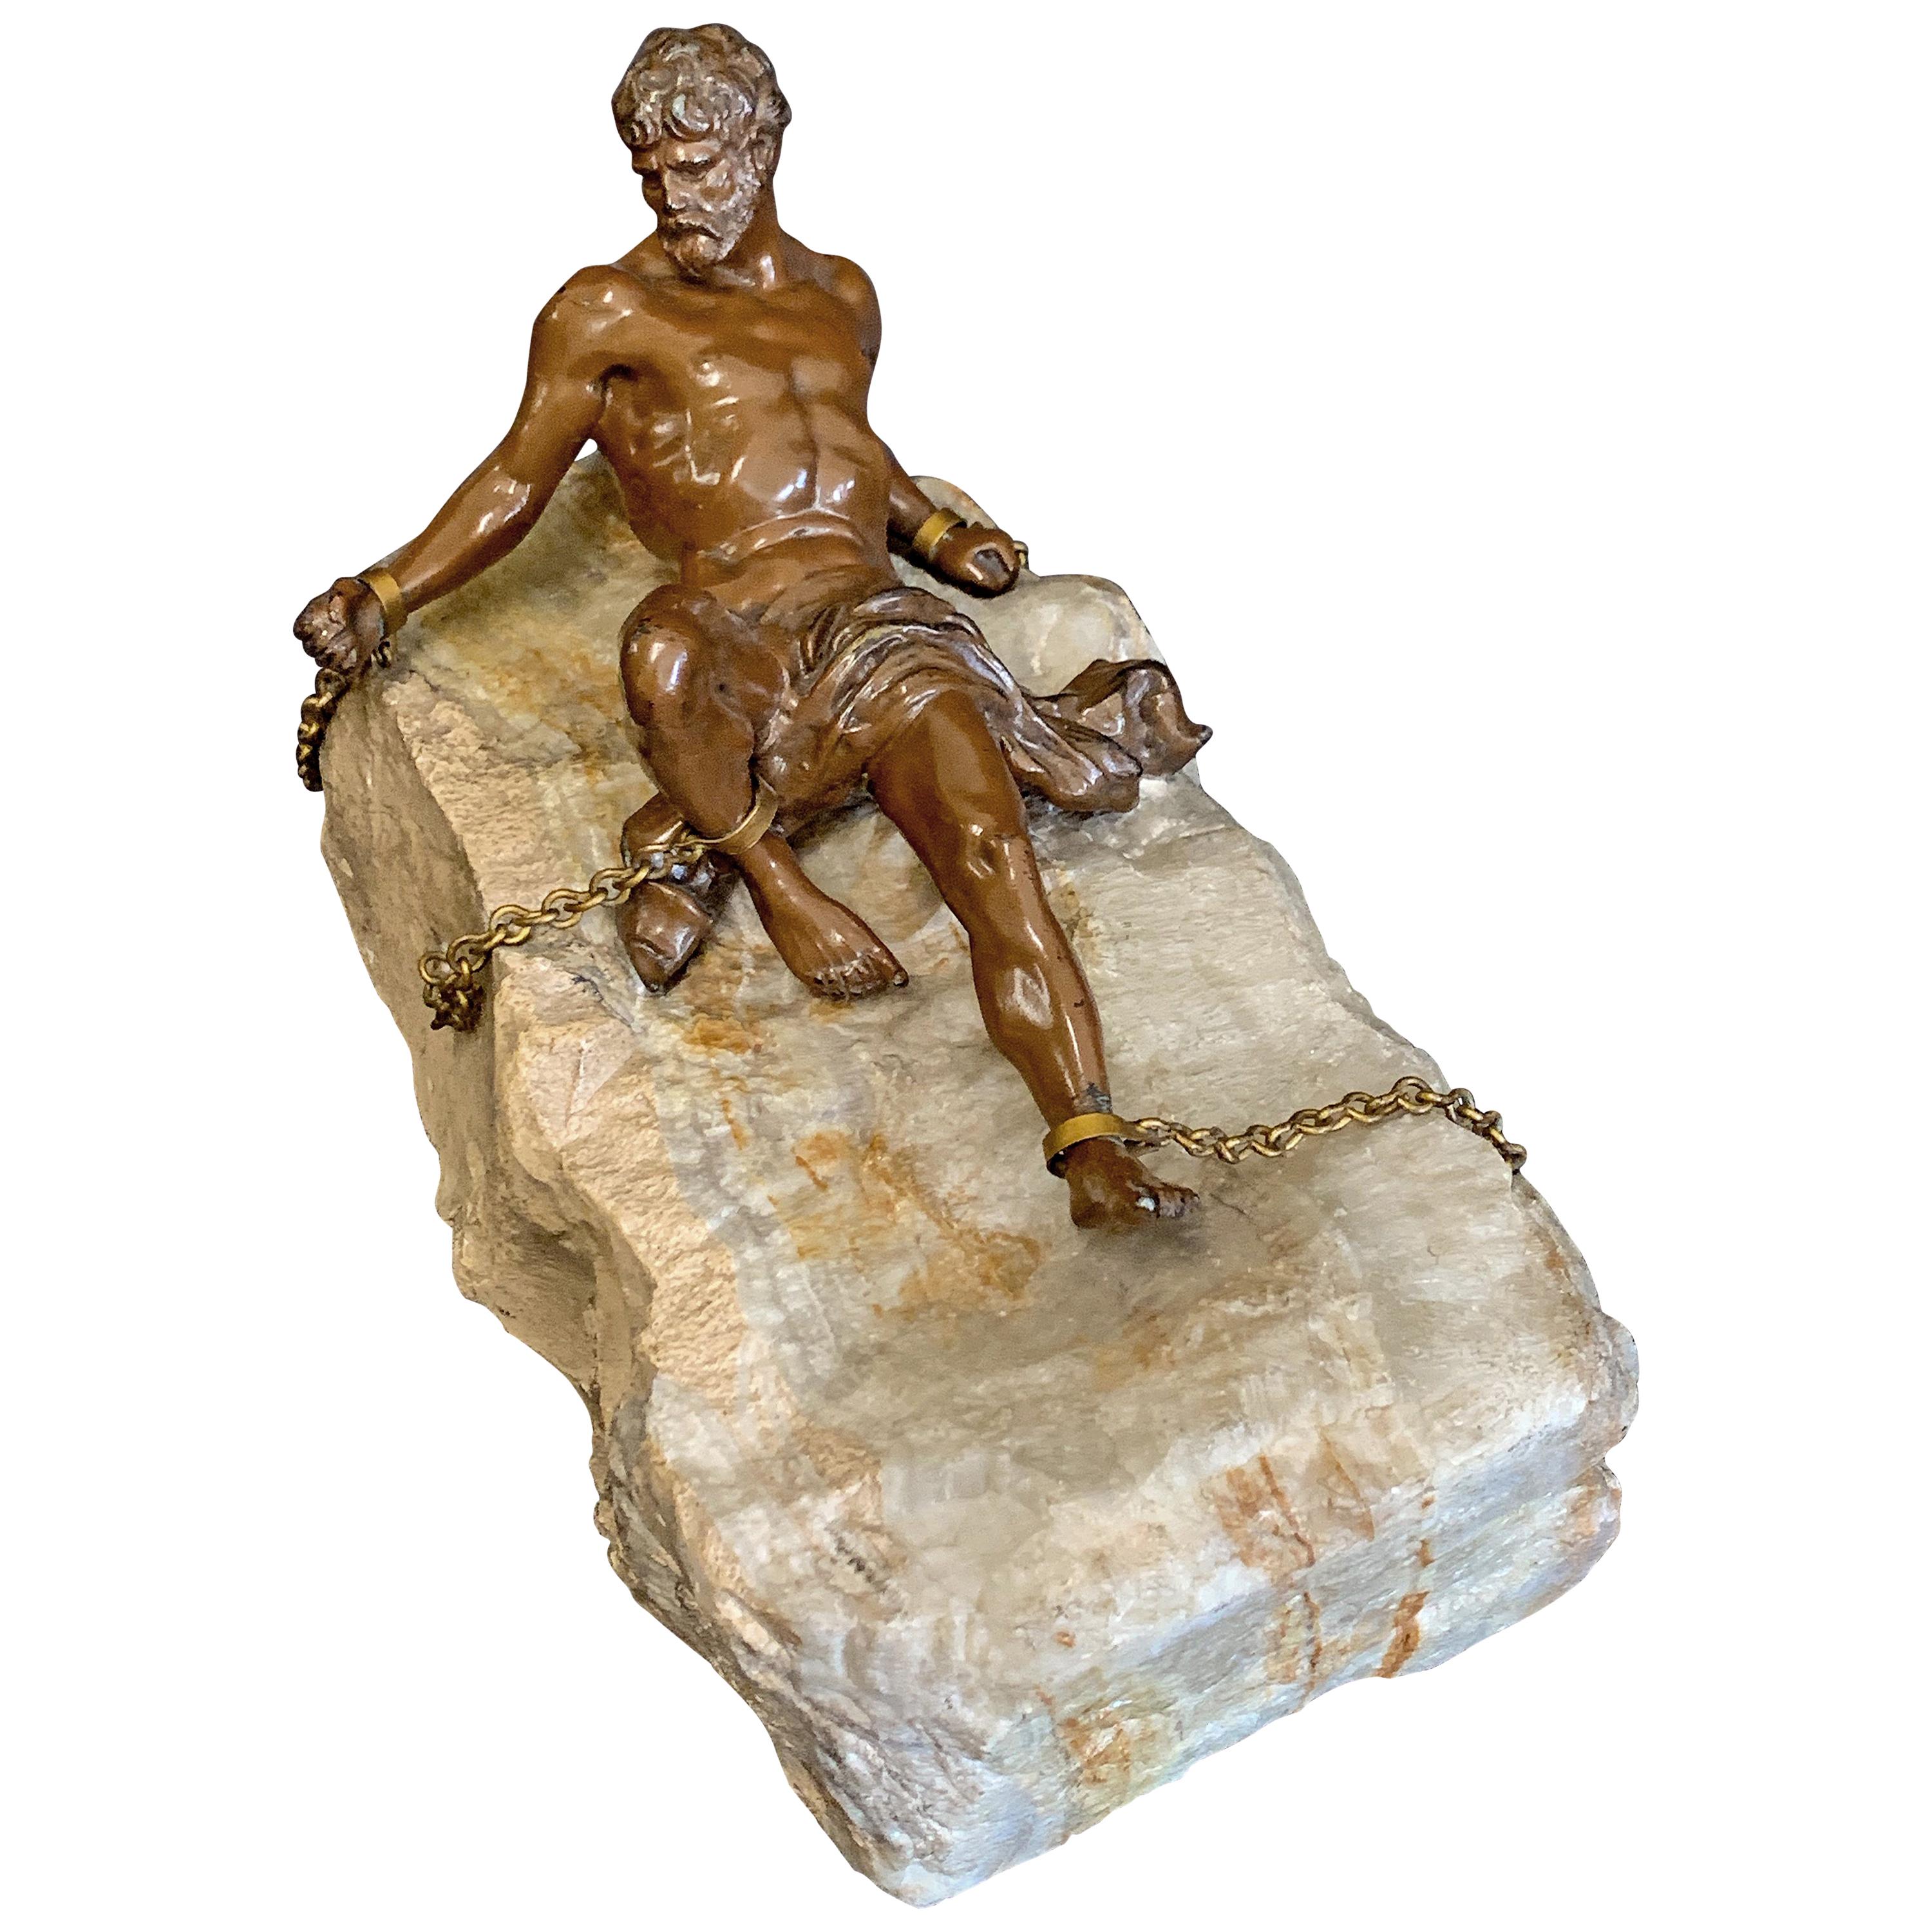 "Prometheus Bound, " Unique Sculpture of Nude Male Figure Chained to Stone